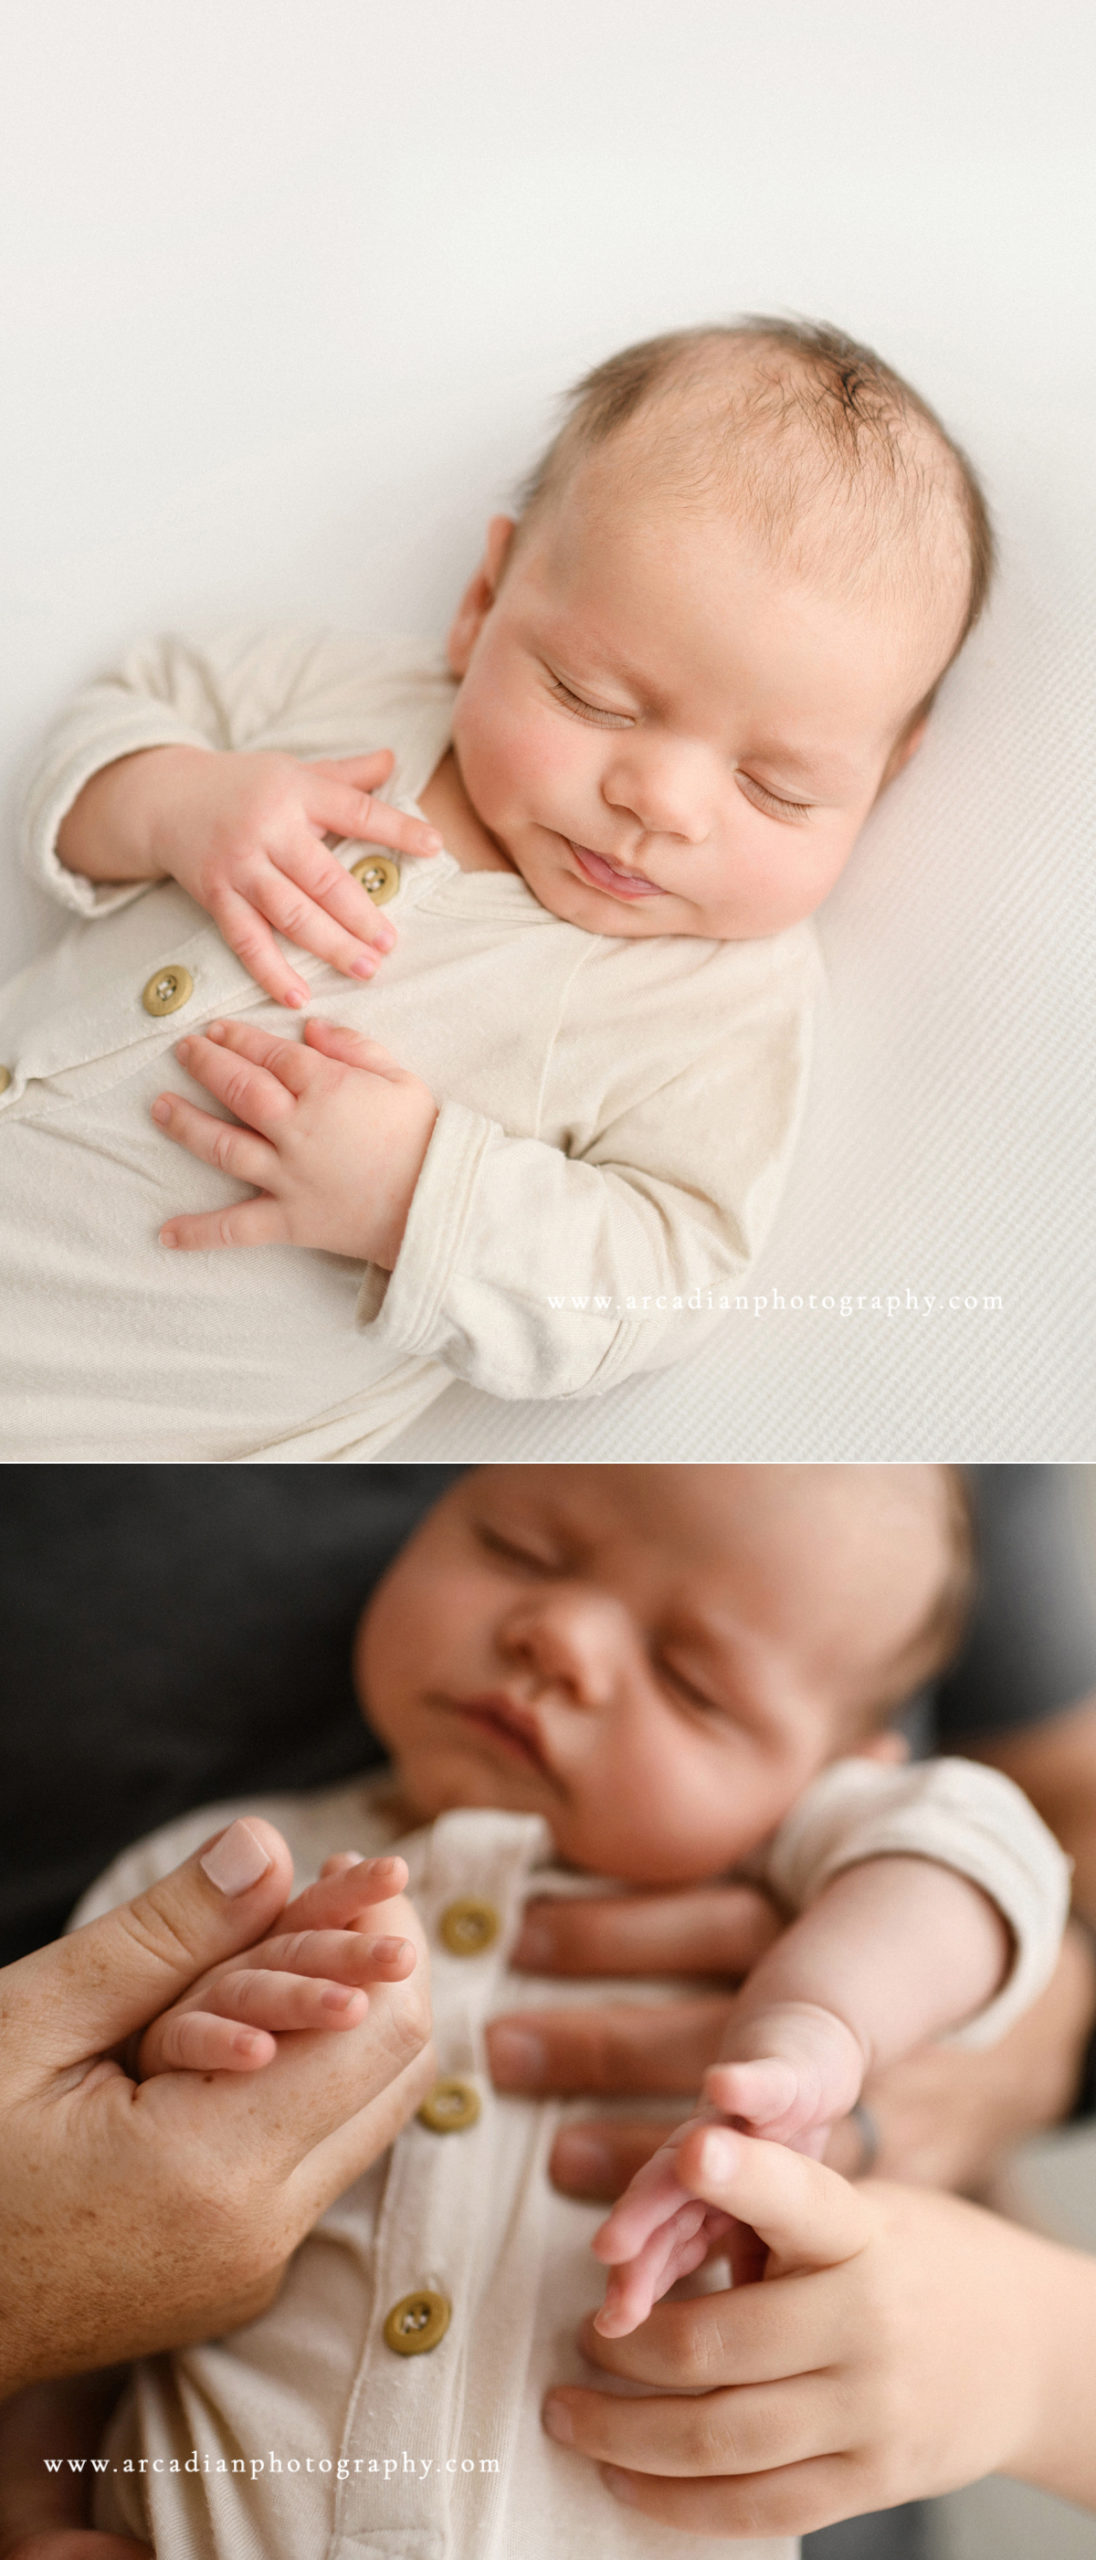 Is my baby too old for newborn photos?